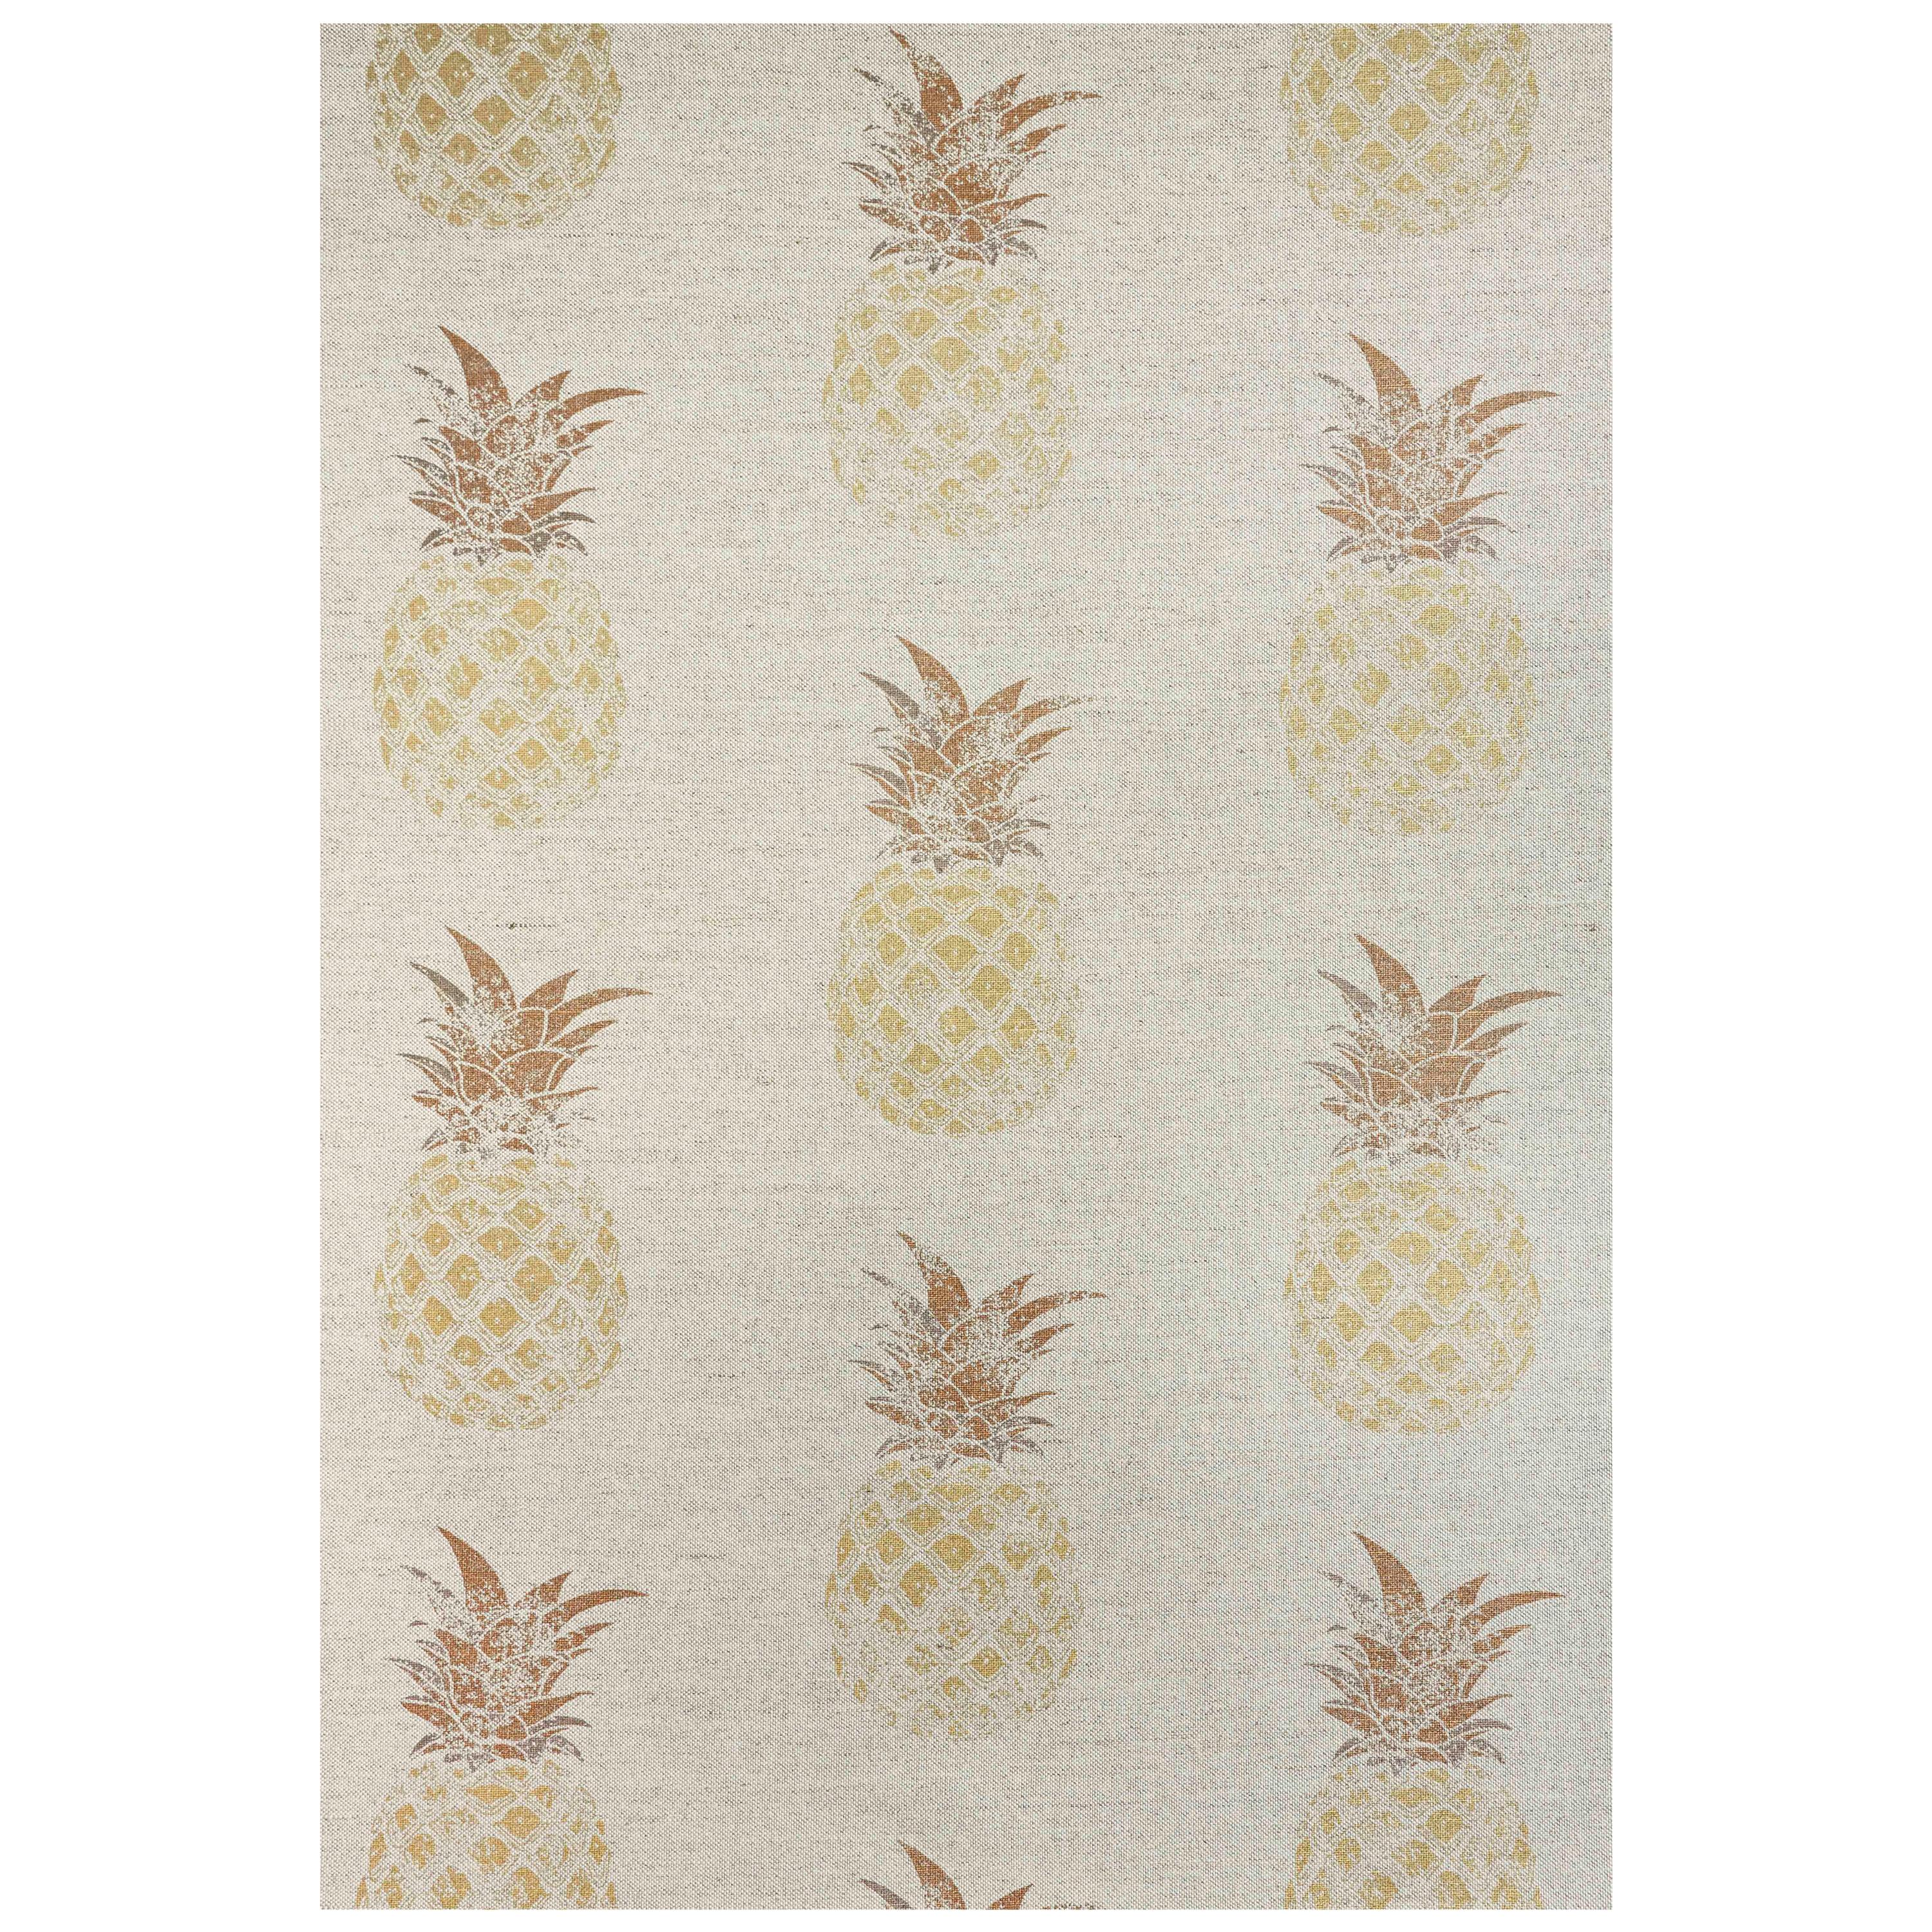 'Pineapple' Contemporary, Traditional Fabric in Gold on Natural For Sale